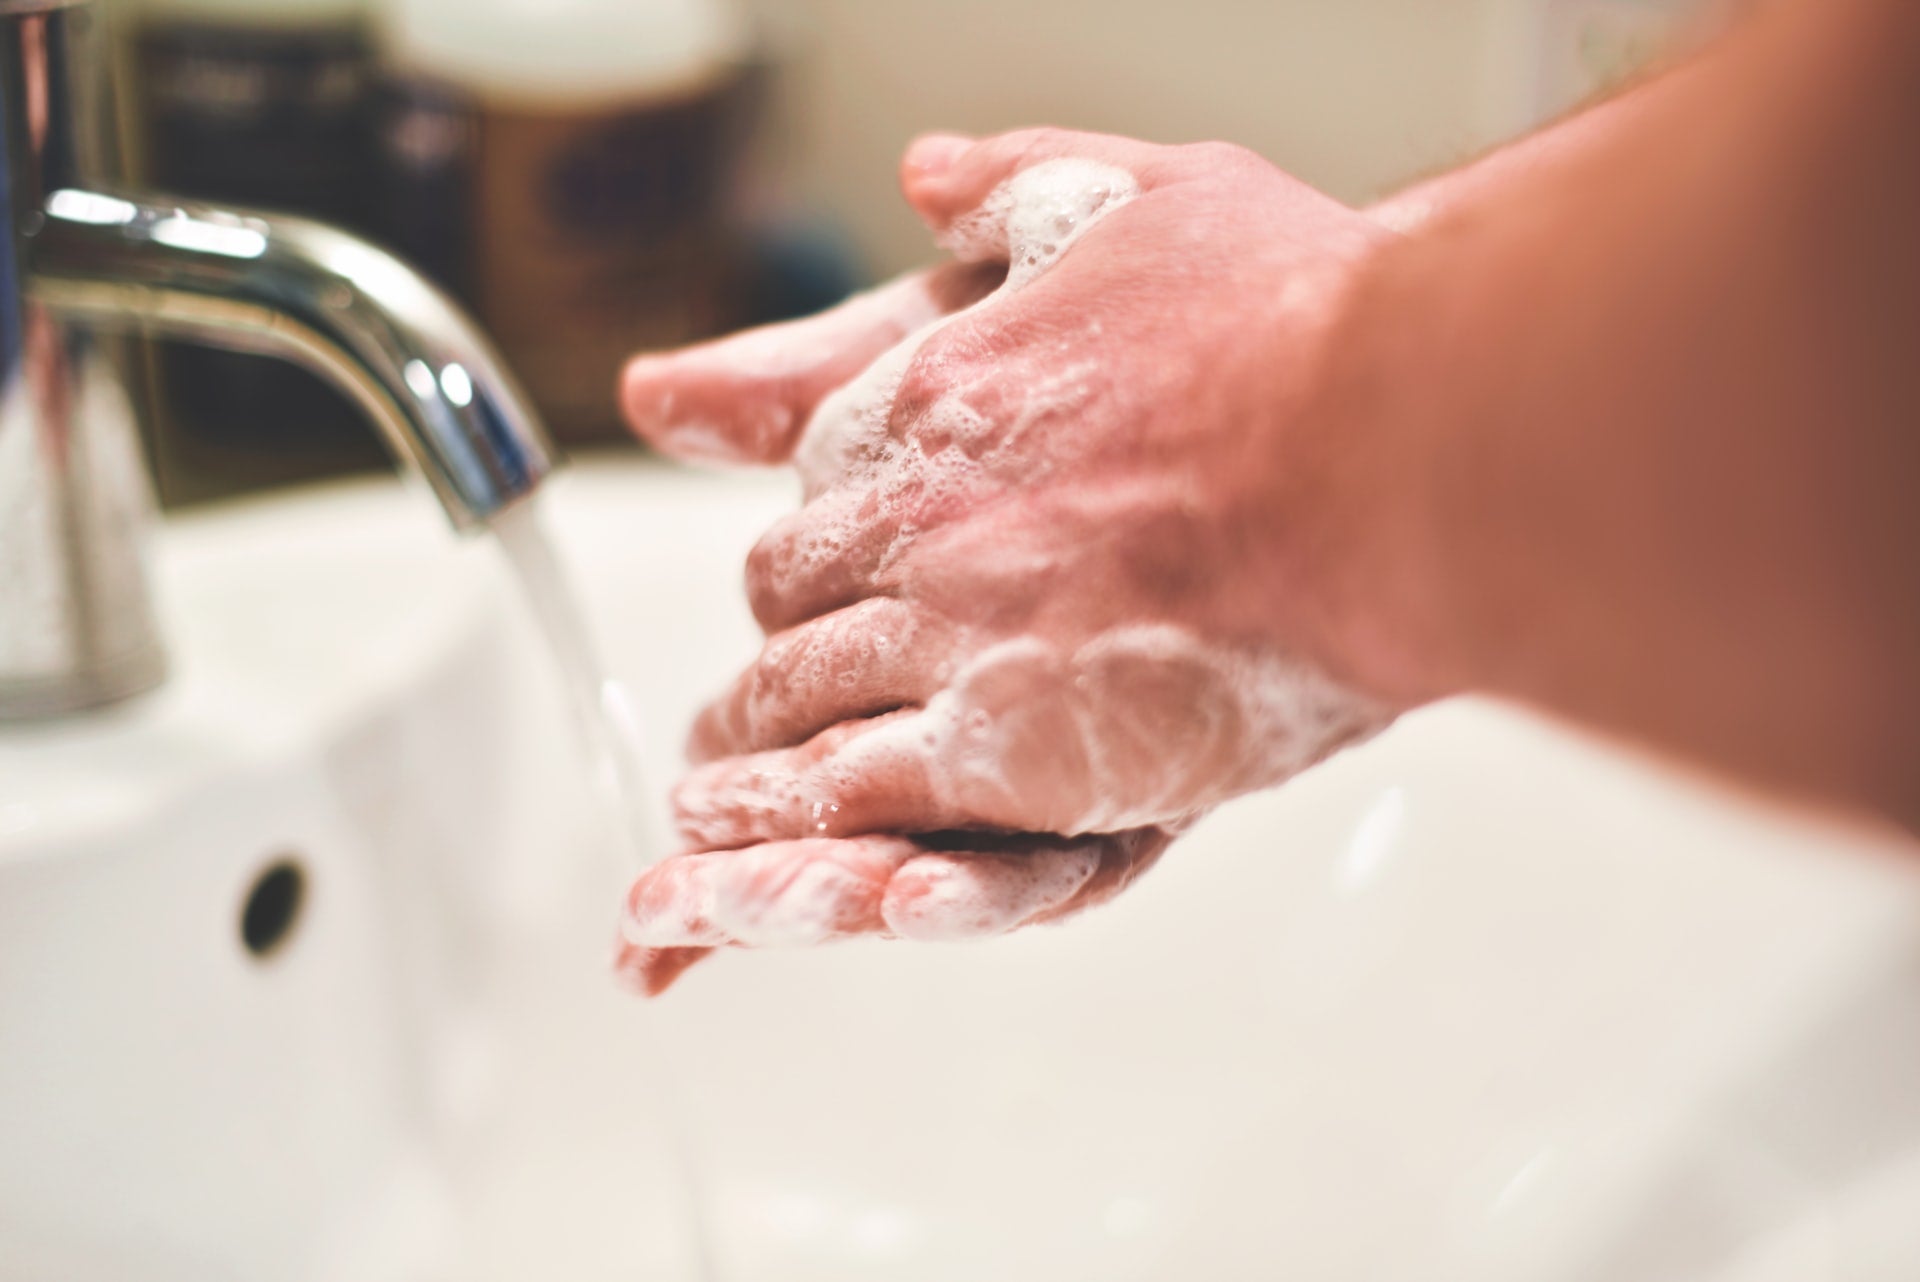 Simple tips to heal your hands after constant washing | Popular Science